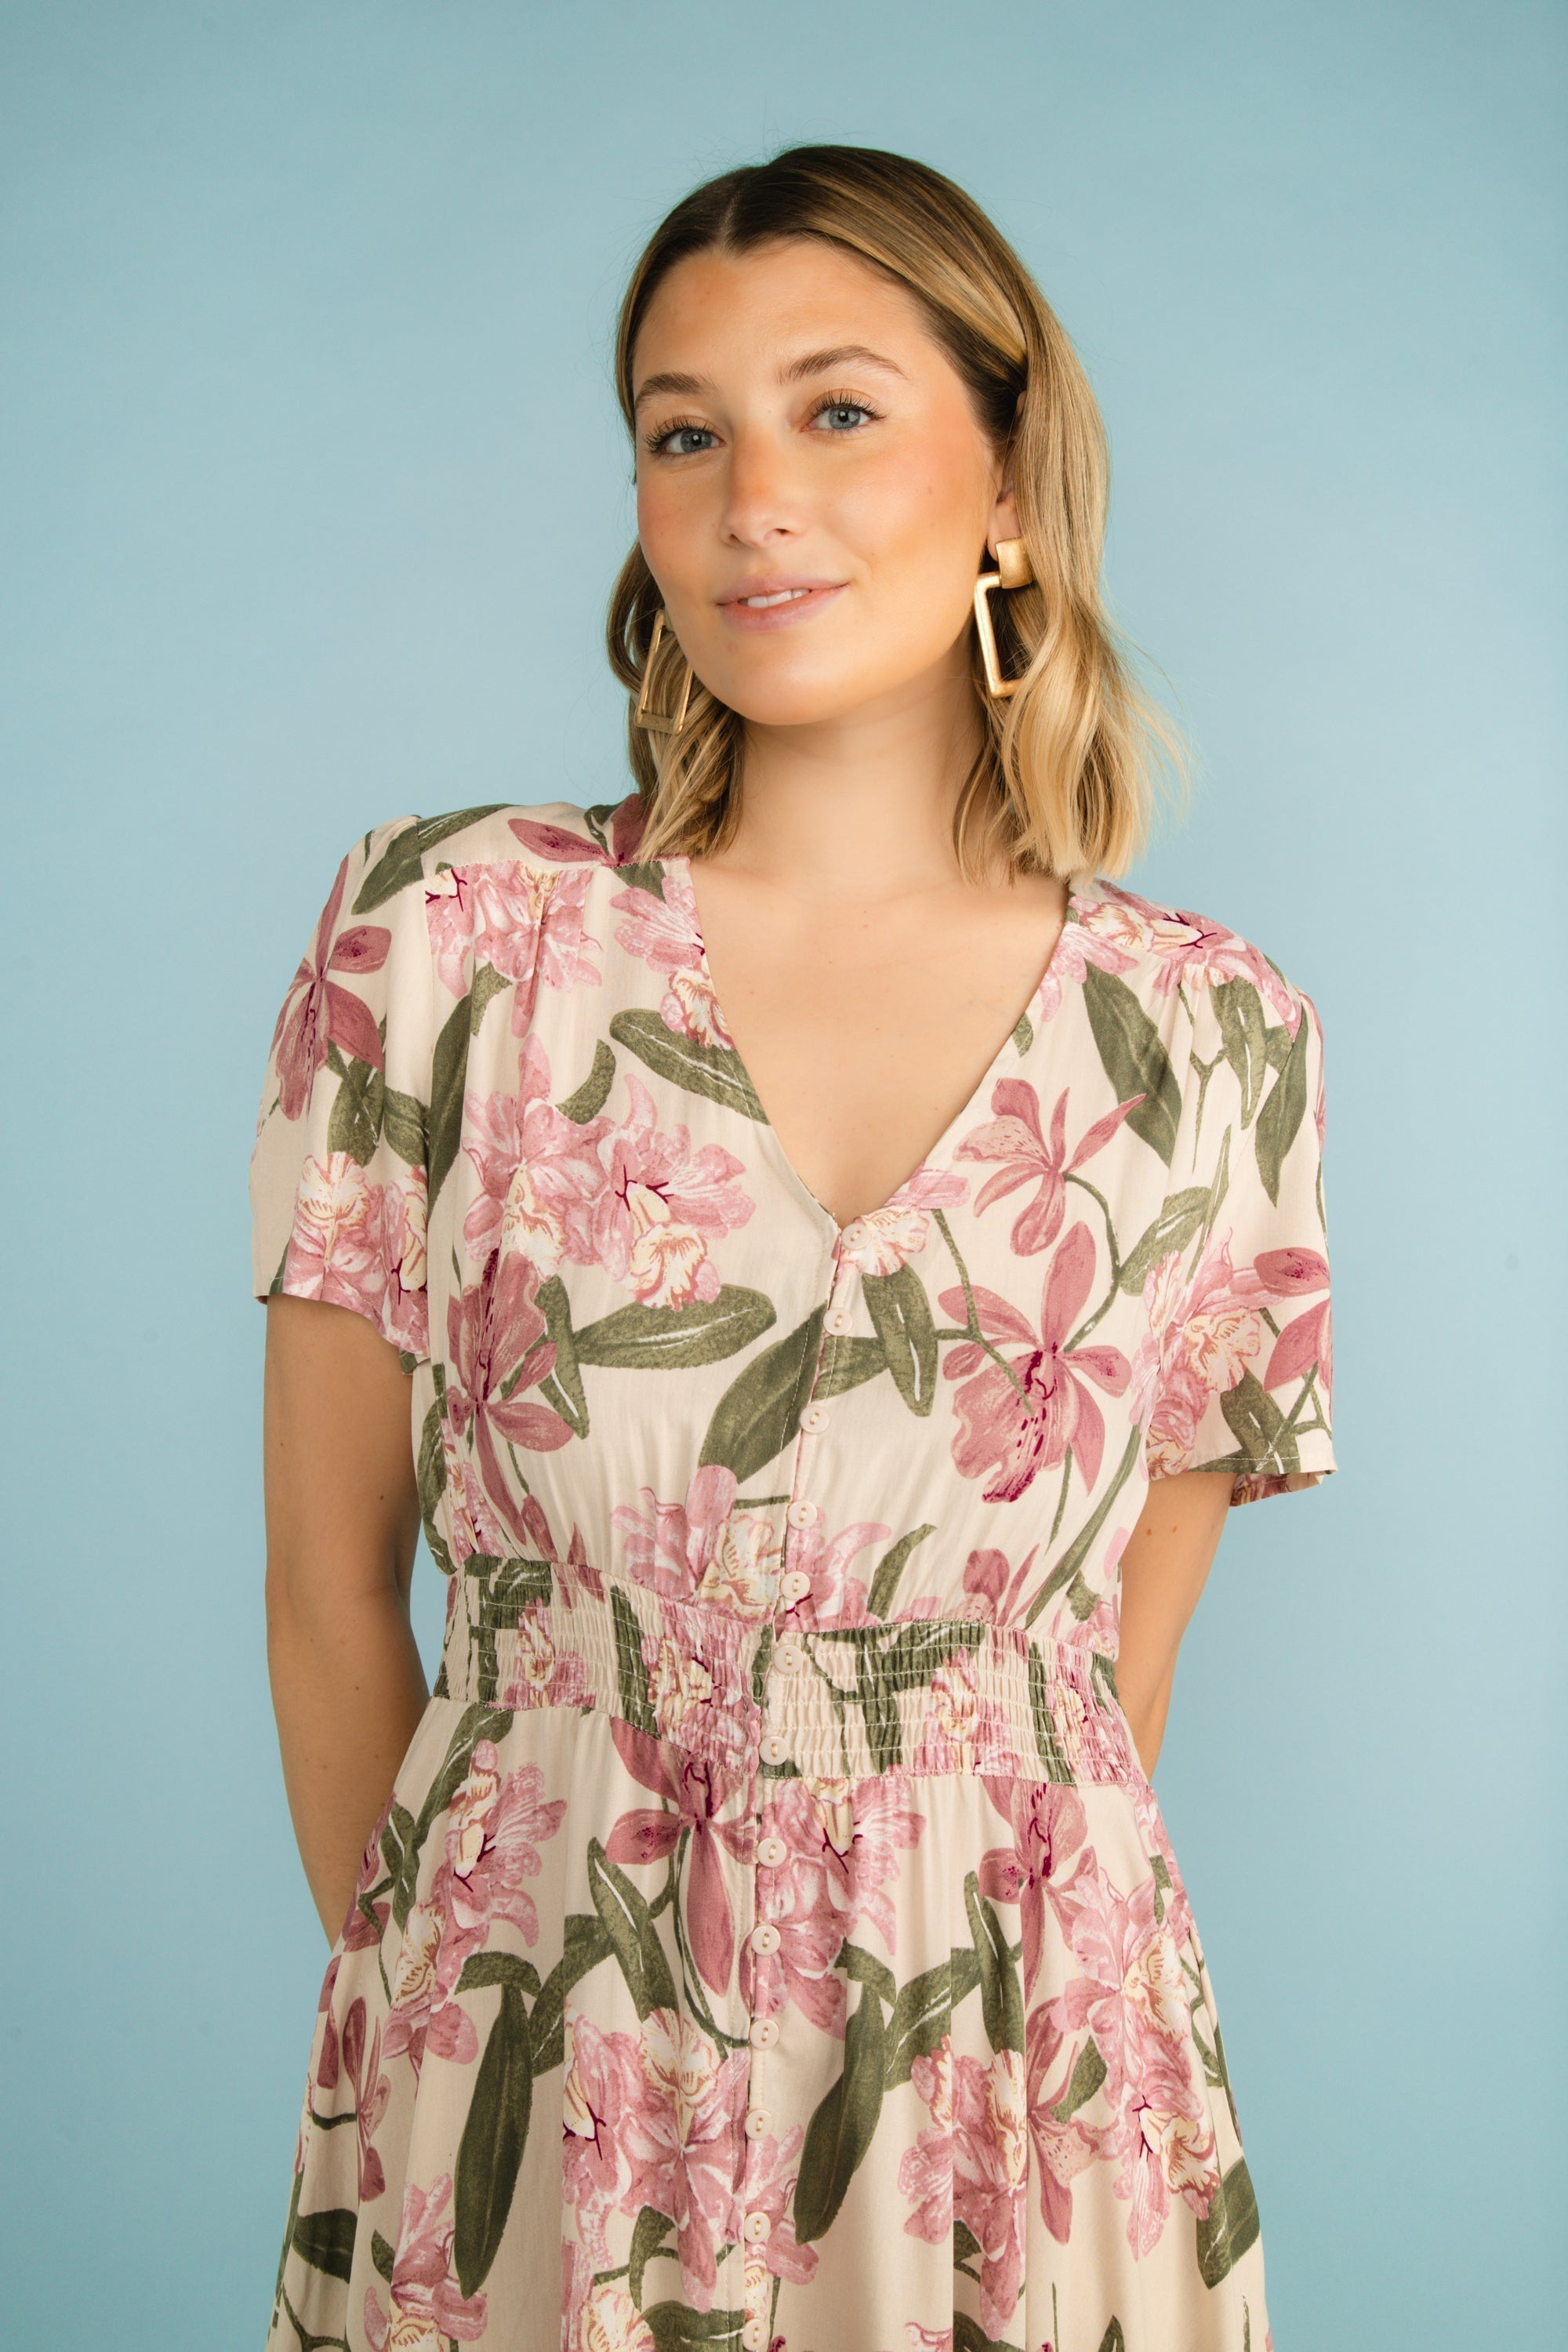 Front bodice of Funsport (241418) Women's Short Sleeve, V-neck Button Front Dress with a tiered maxi skirt in a pink floral print over a cream background